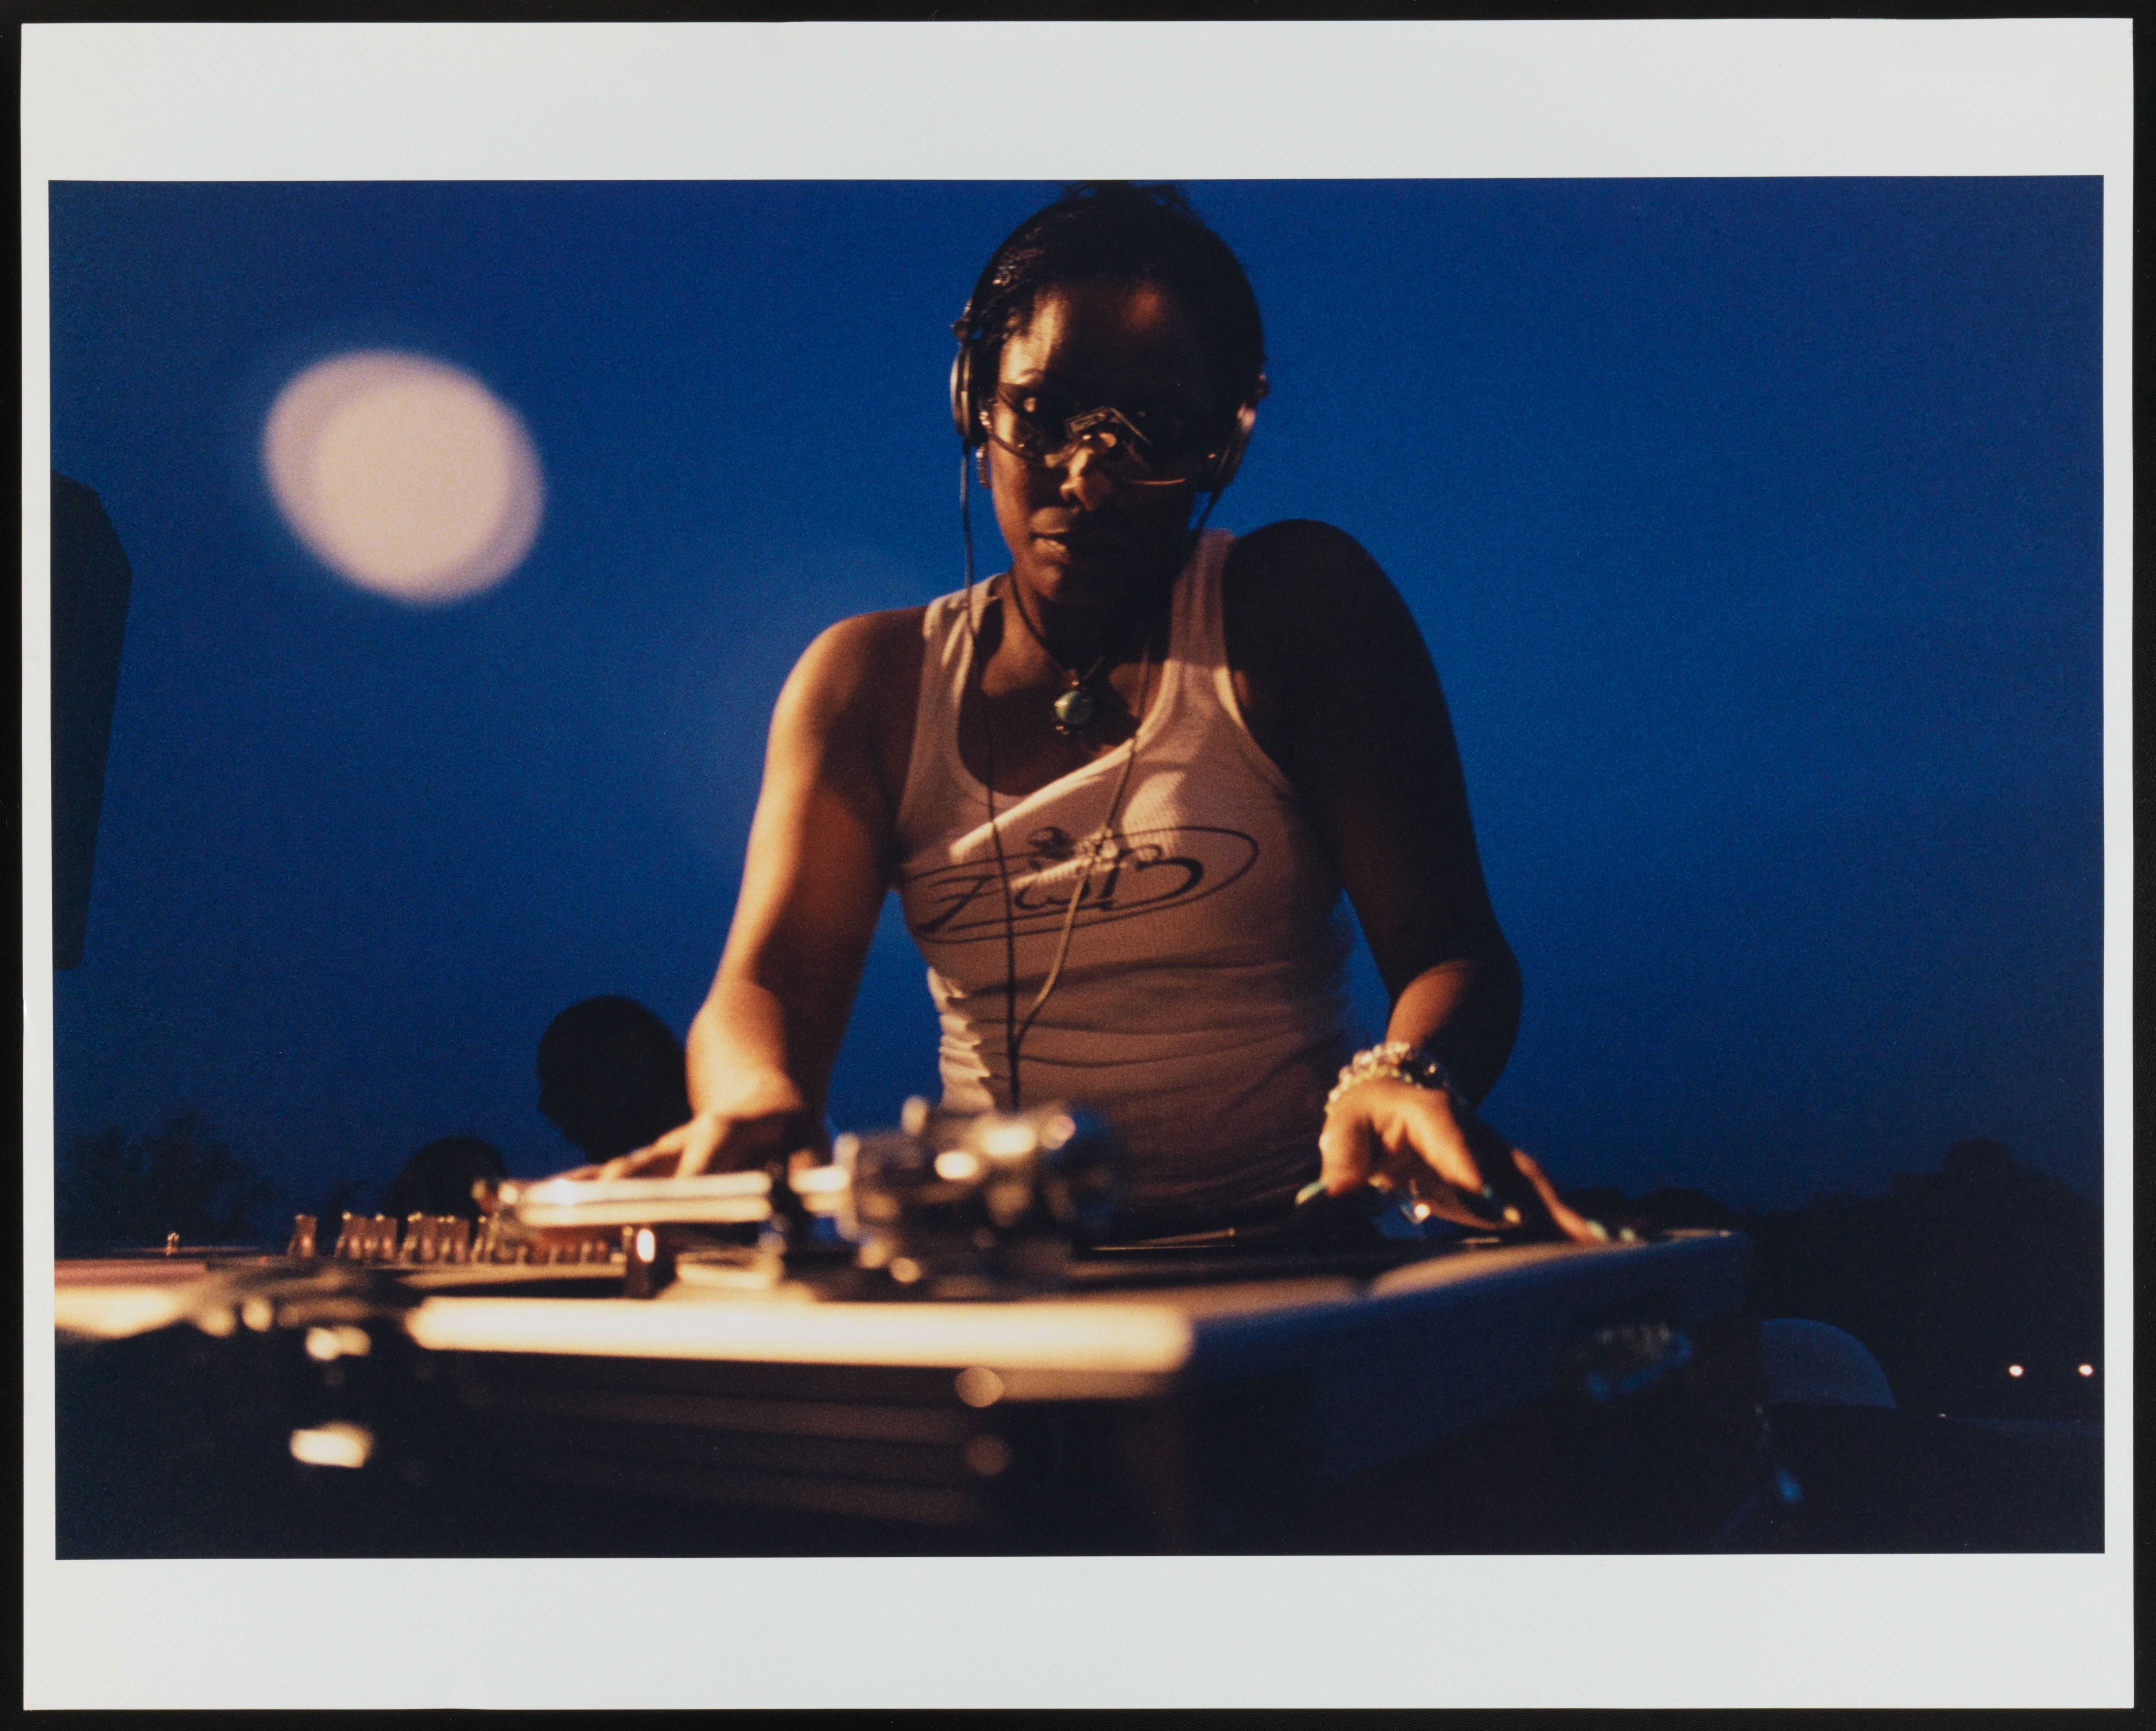 African American woman behind a turntable deck.  She is wearing a light colored tank top, headphone, glasses and a necklace.  A round of light is out of focus in the top left background.